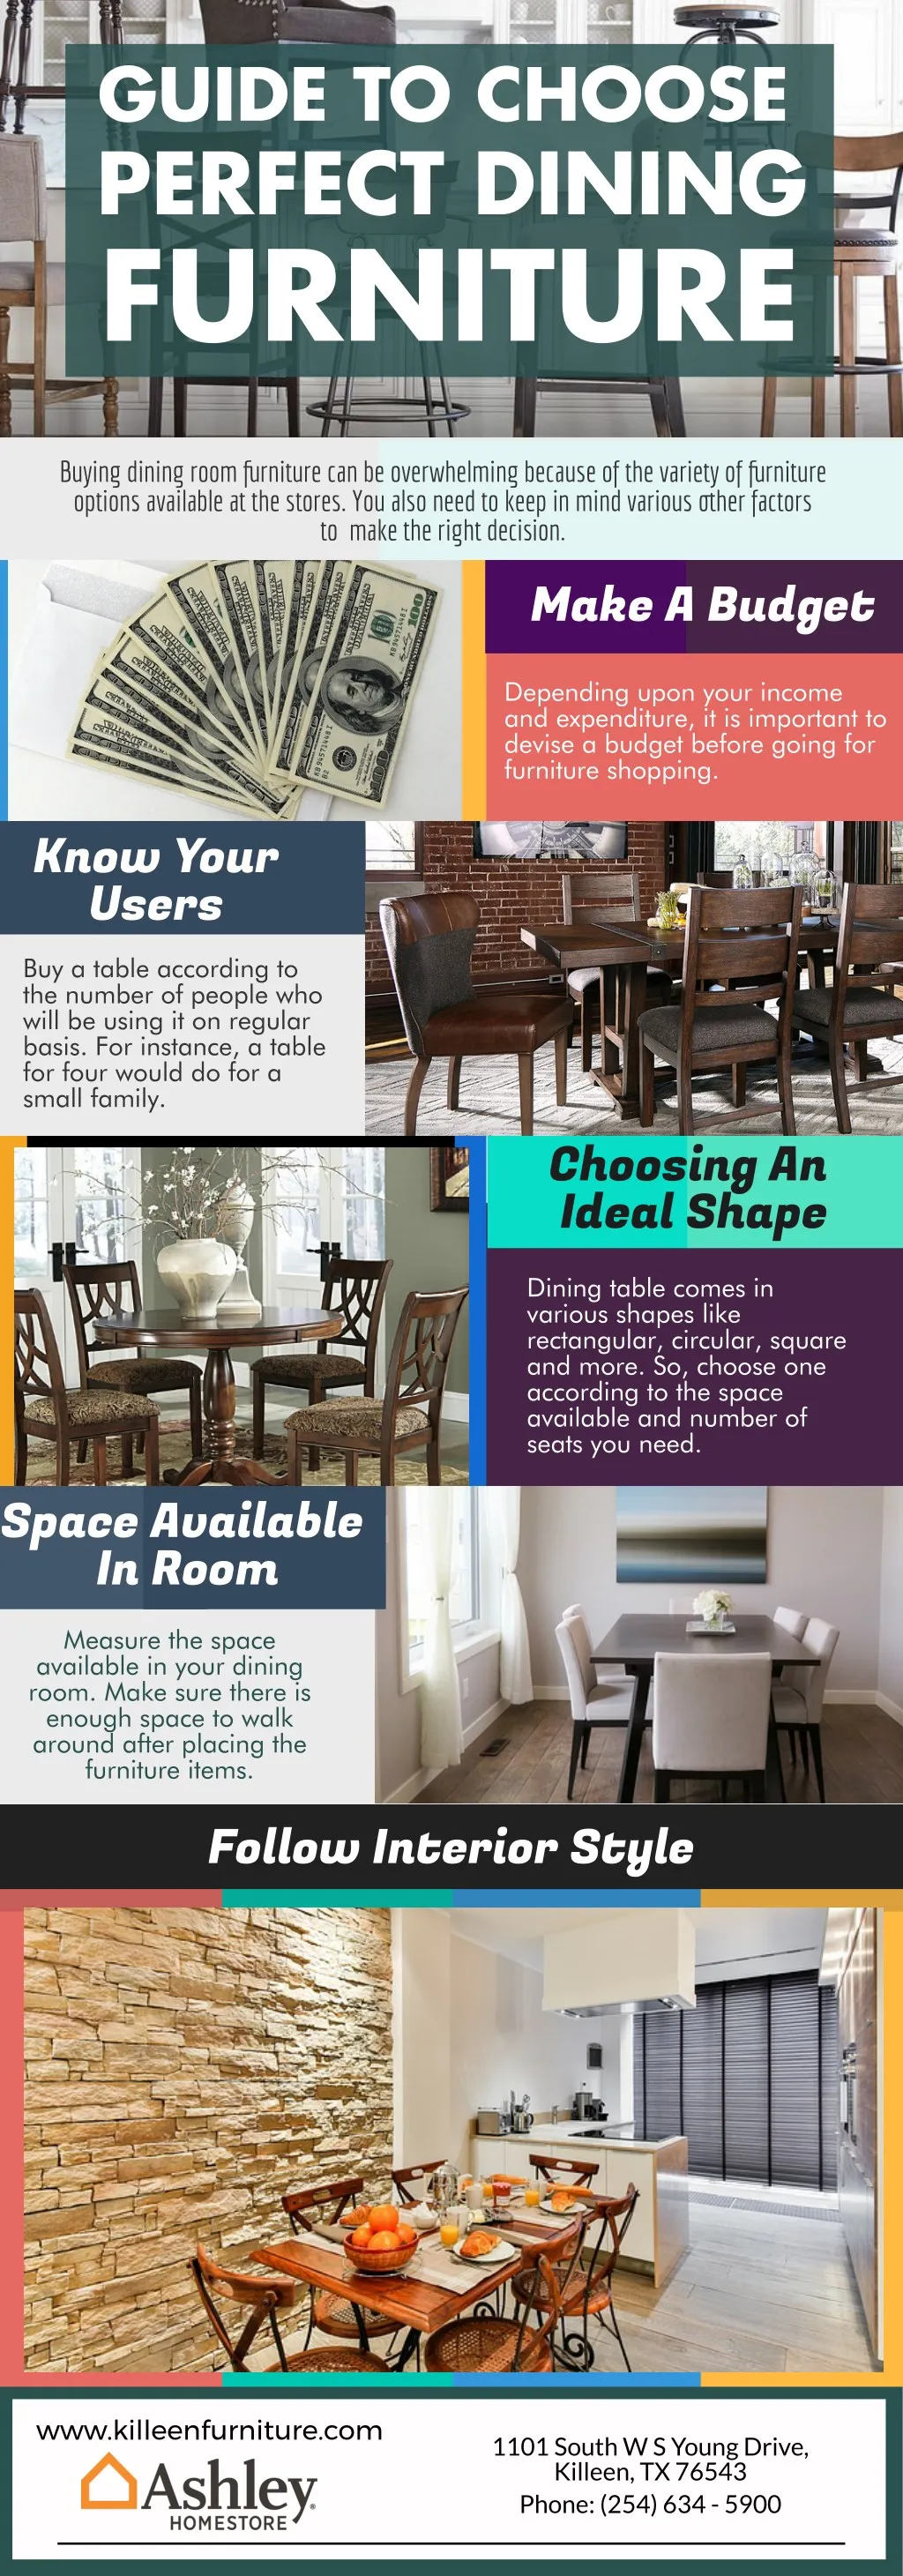 guide to choose perfect dining furniture